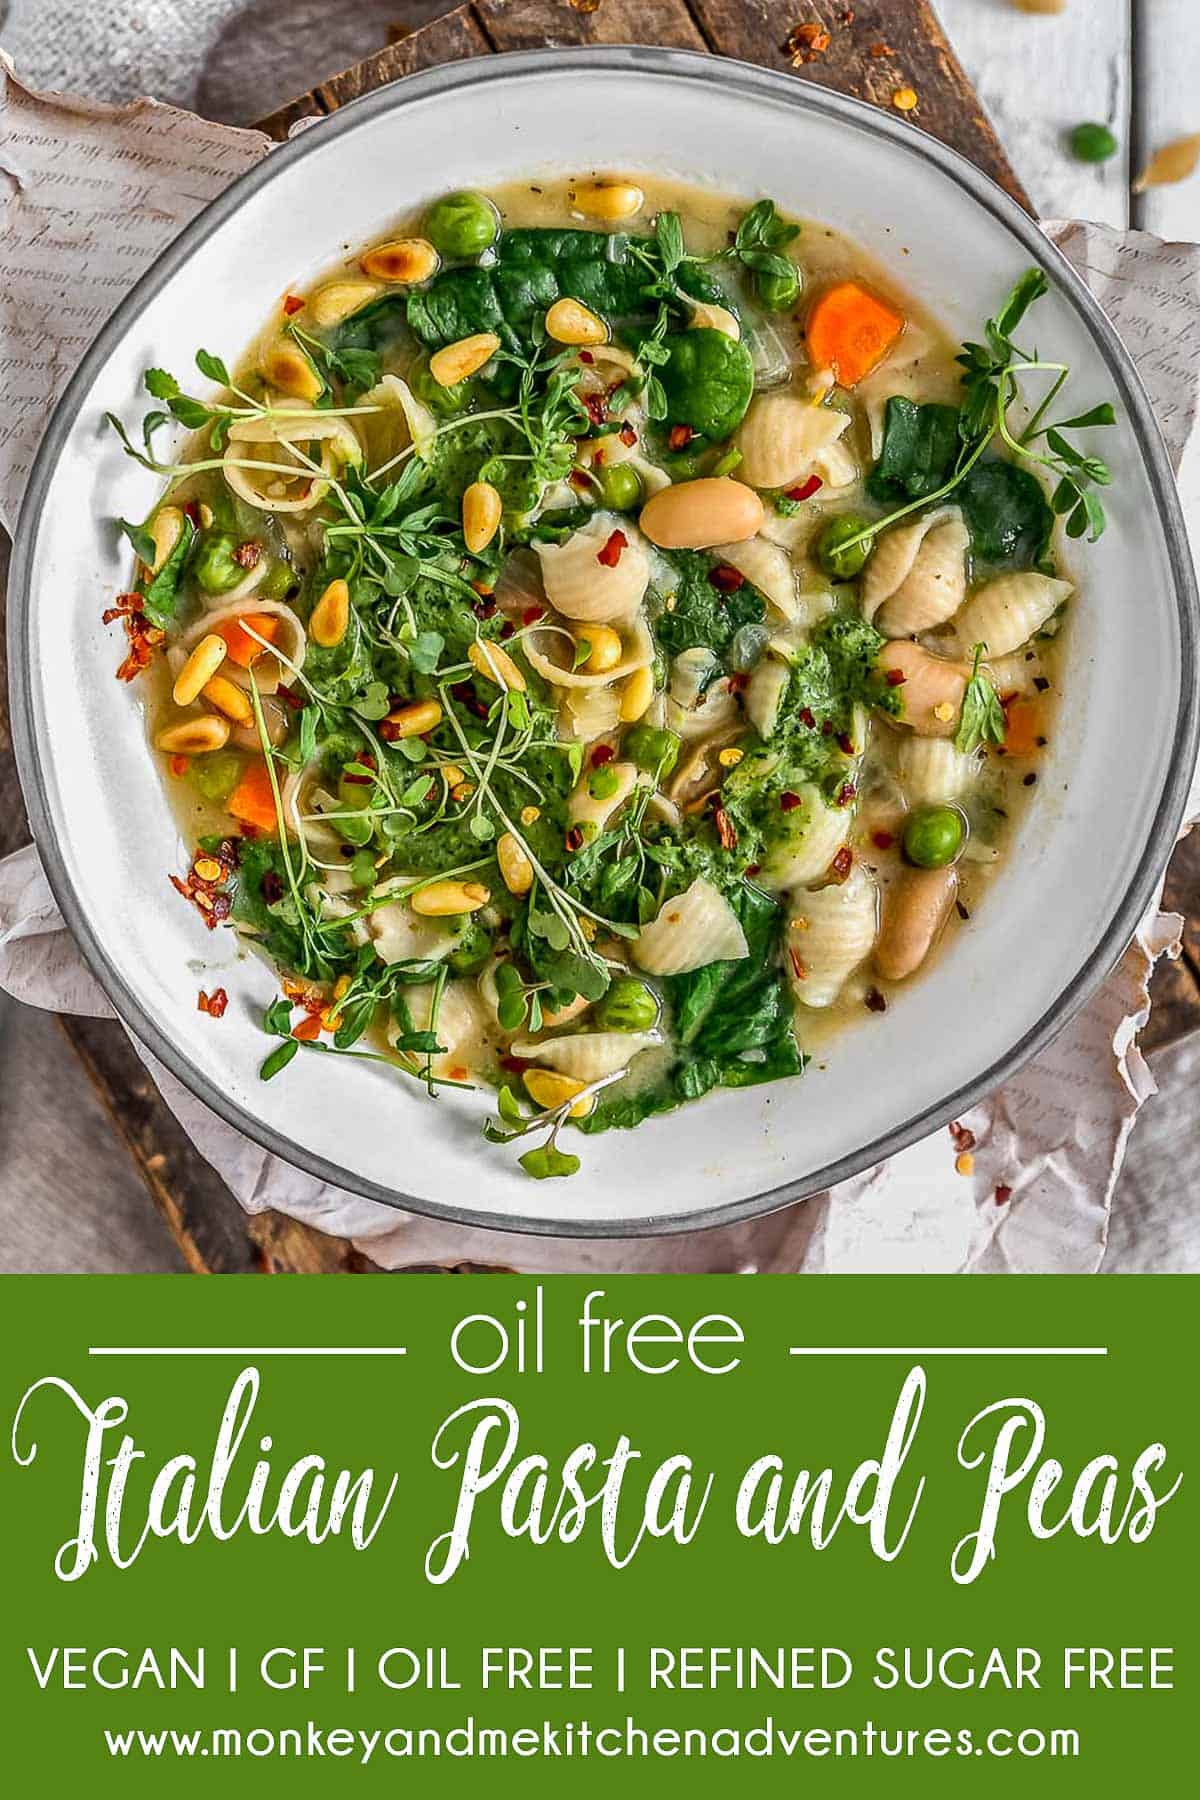 Italian Pasta and Peas, vegan soup, vegan pasta, peas, hearty soup, soup, pea soup, plant based, vegan, vegetarian, whole food plant based, gluten free, recipe, wfpb, healthy, healthy vegan, oil free, no refined sugar, no oil, refined sugar free, dairy free, dinner party, entertaining, dinner, lunch, oil free soup, oil free dinner, easy recipe, fall, winter, spring, soup recipes, Italian, food photography, photography, soup photography, flatlay